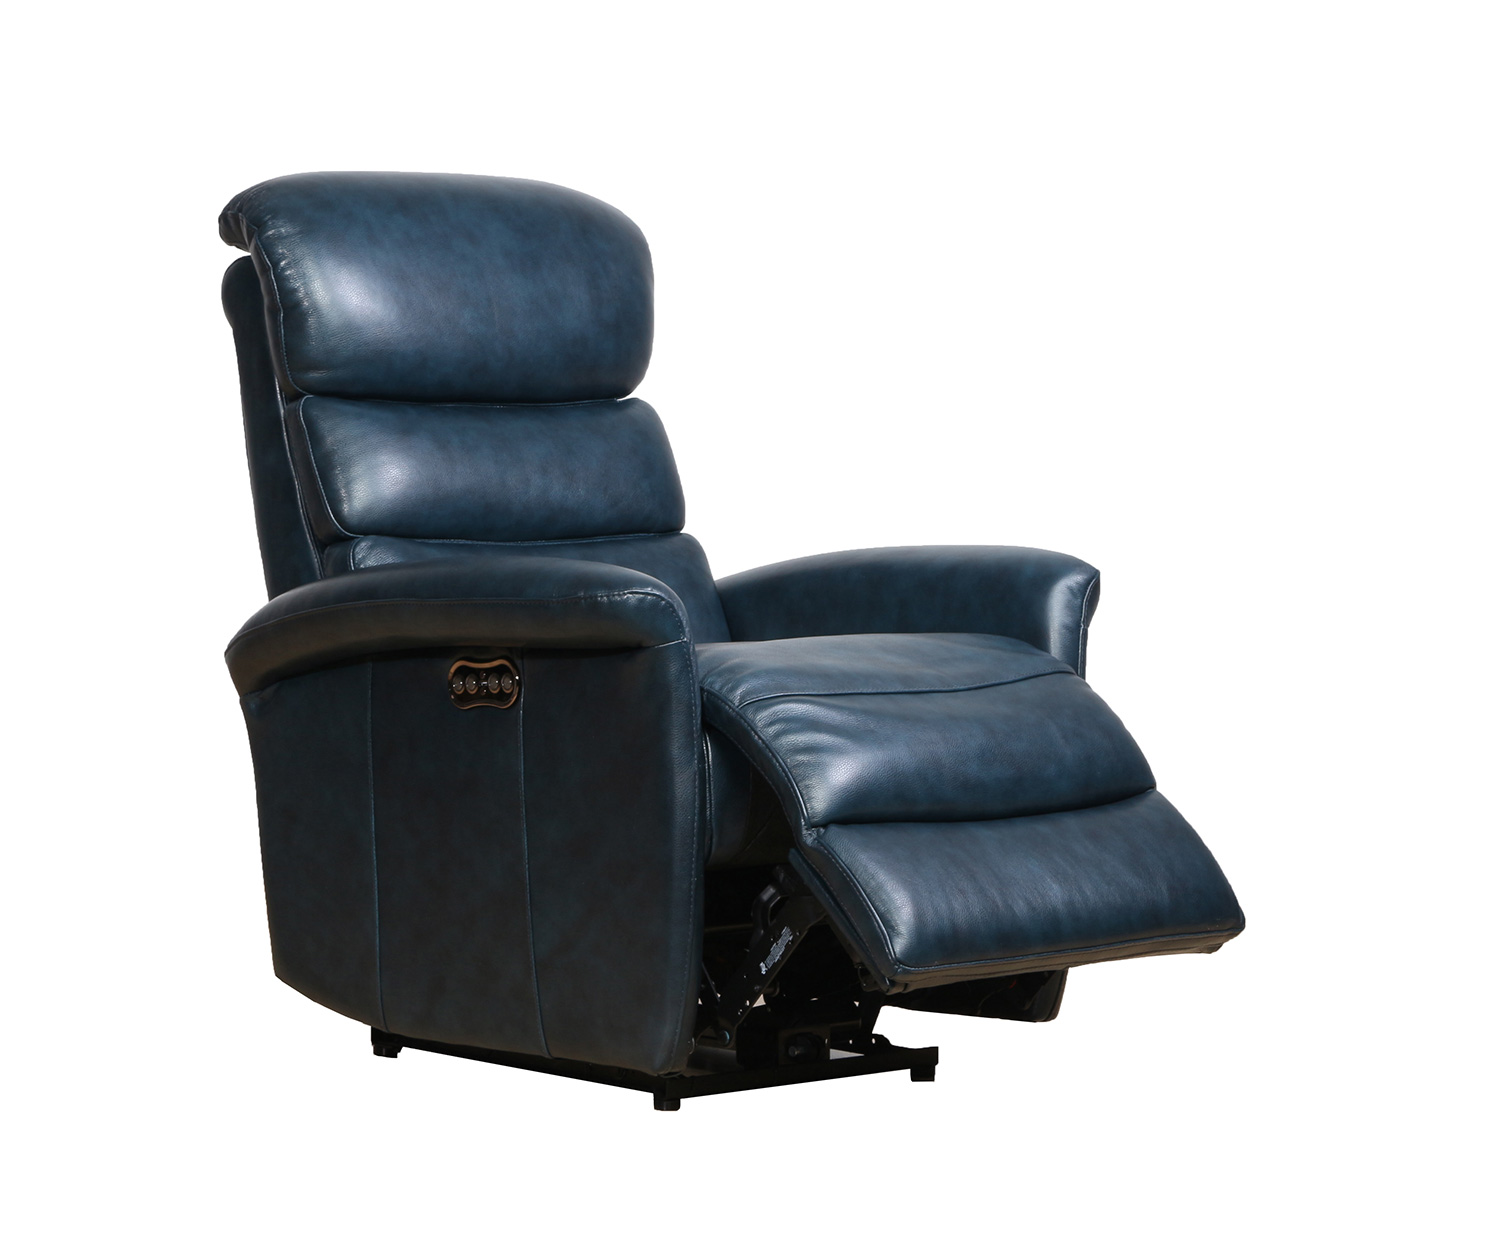 Barcalounger Kelso Power Recliner Chair with Power Head Rest - Ryegate Sapphire Blue/Leather Match